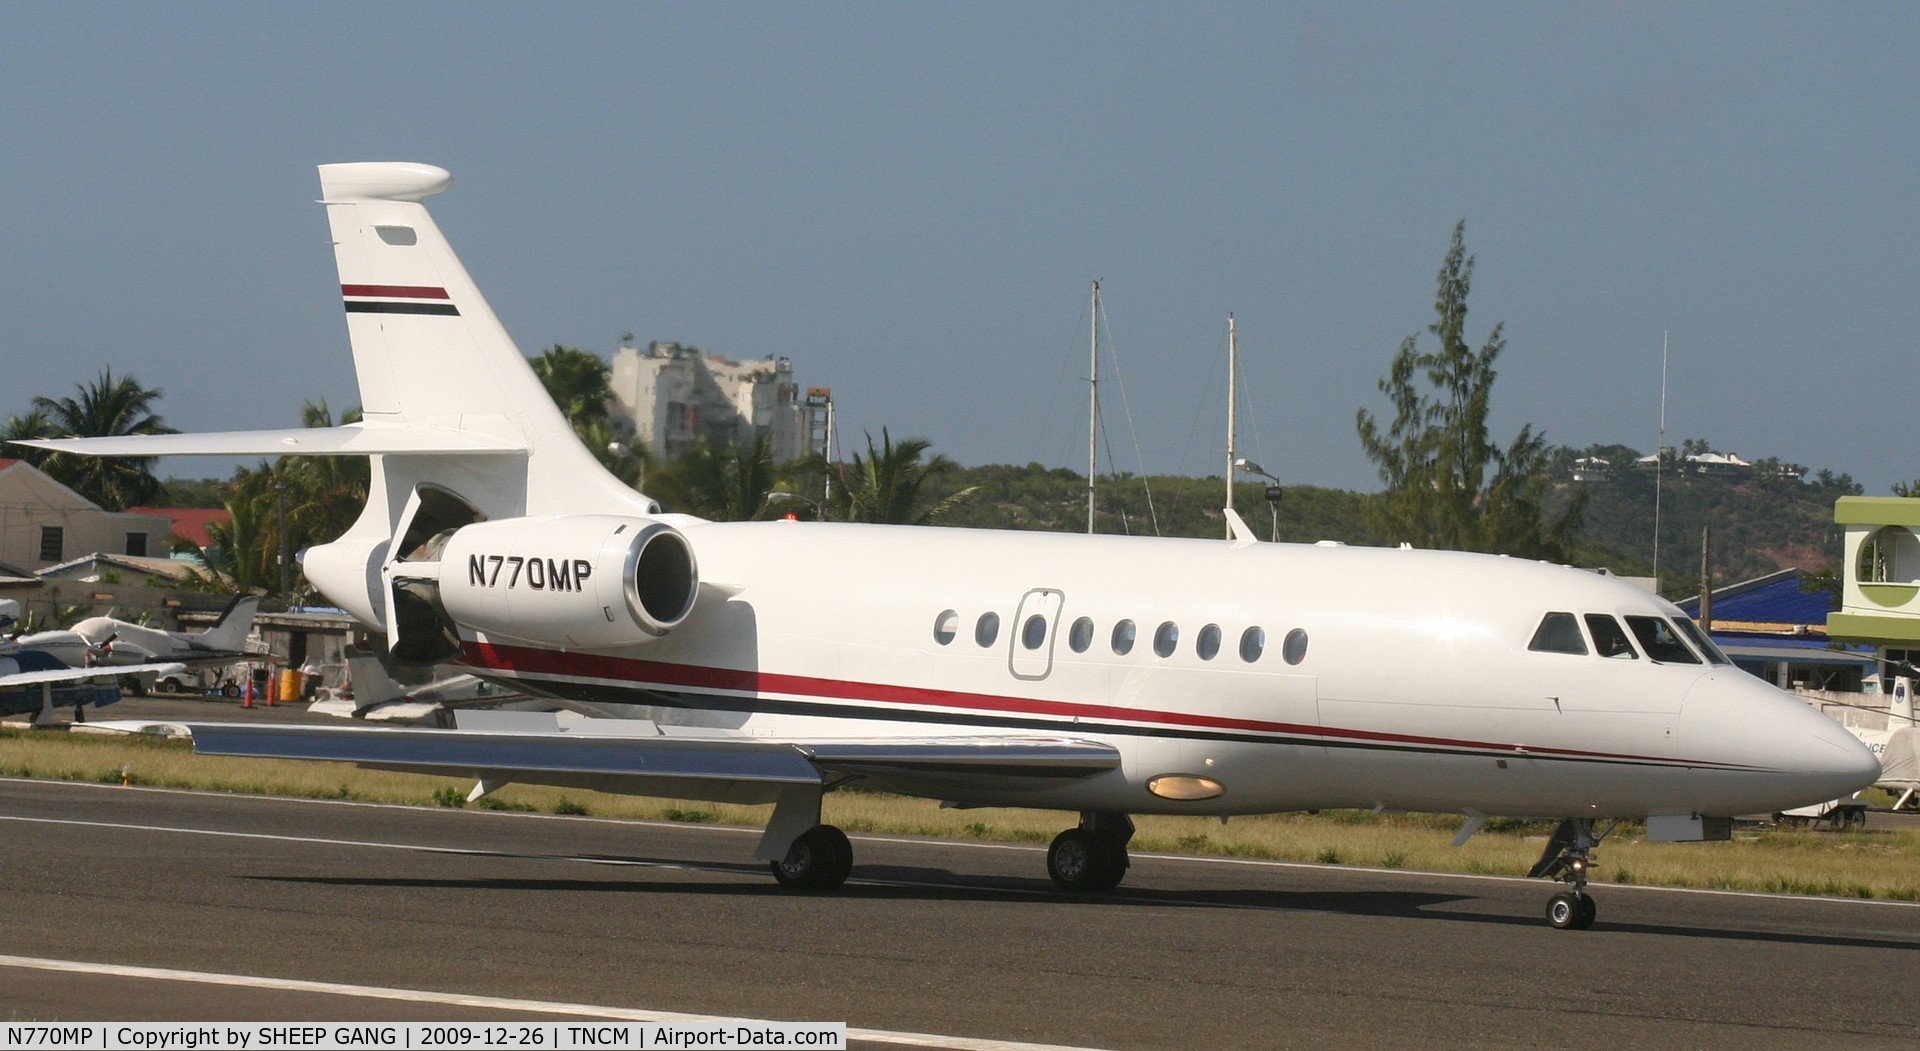 N770MP, 1999 Dassault Falcon 2000 C/N 99, N770MP just landed at tncm